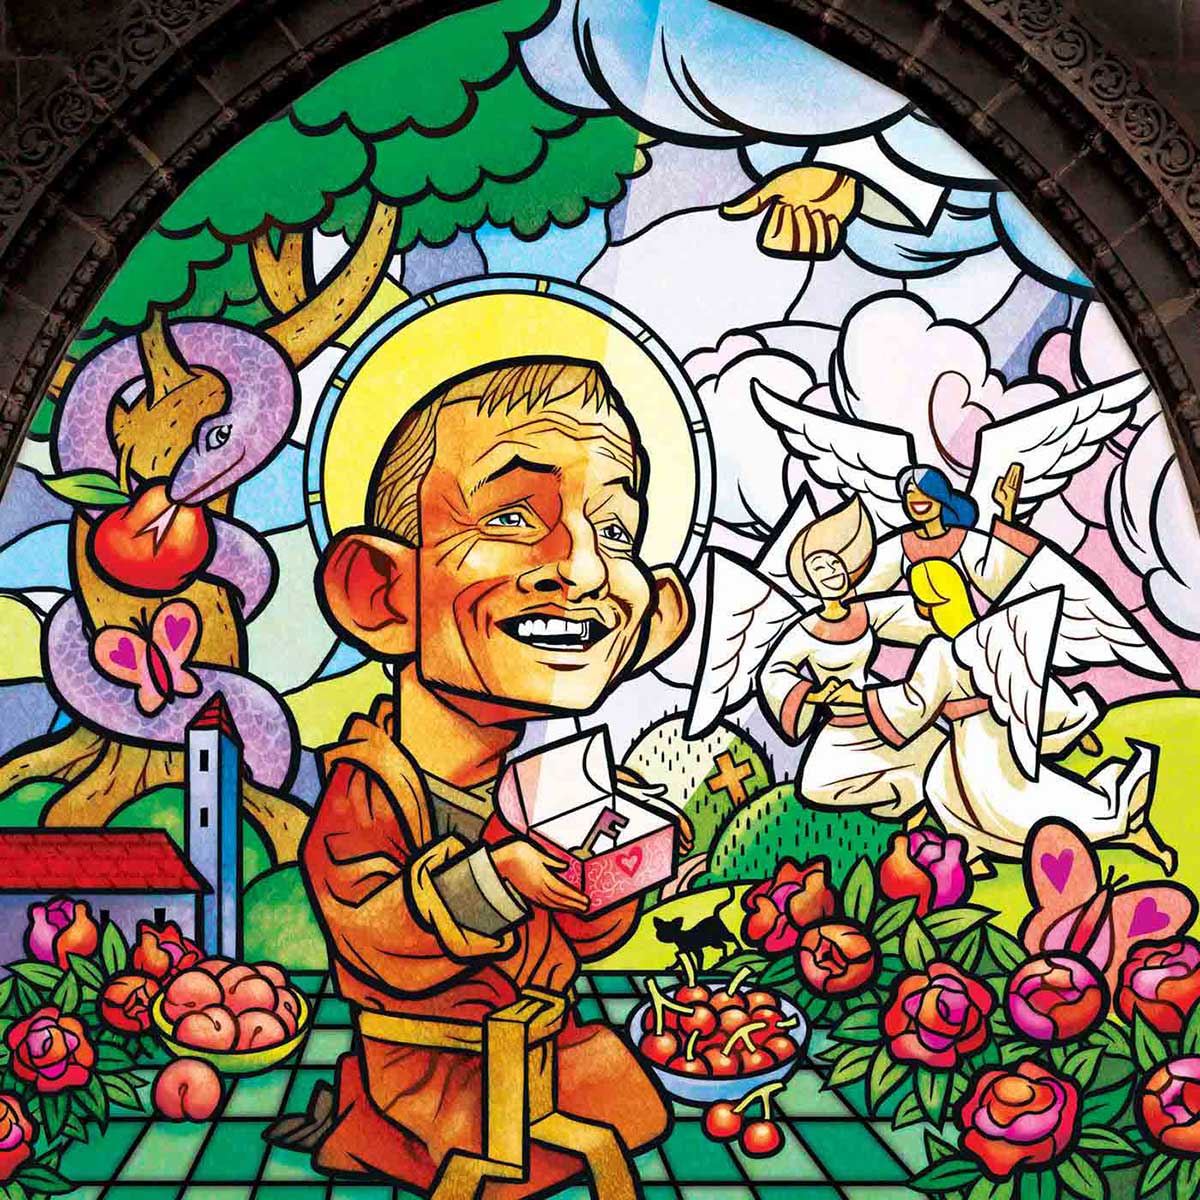 Political cartoon depicting Tony Abbott as a monk, on a stained glass window. He kneels in the centre of the image, wearing a monk's robe. He holds a small box with a key in it. Around him are flowers, food, angels and a tree with the serpent from the Garden of Eden wrapped around it. In the sky, the hand of God emerges from a cloud, giving the 'thumbs up' sign. Abbott's expression is one of amazement and thanks. - click to view larger image